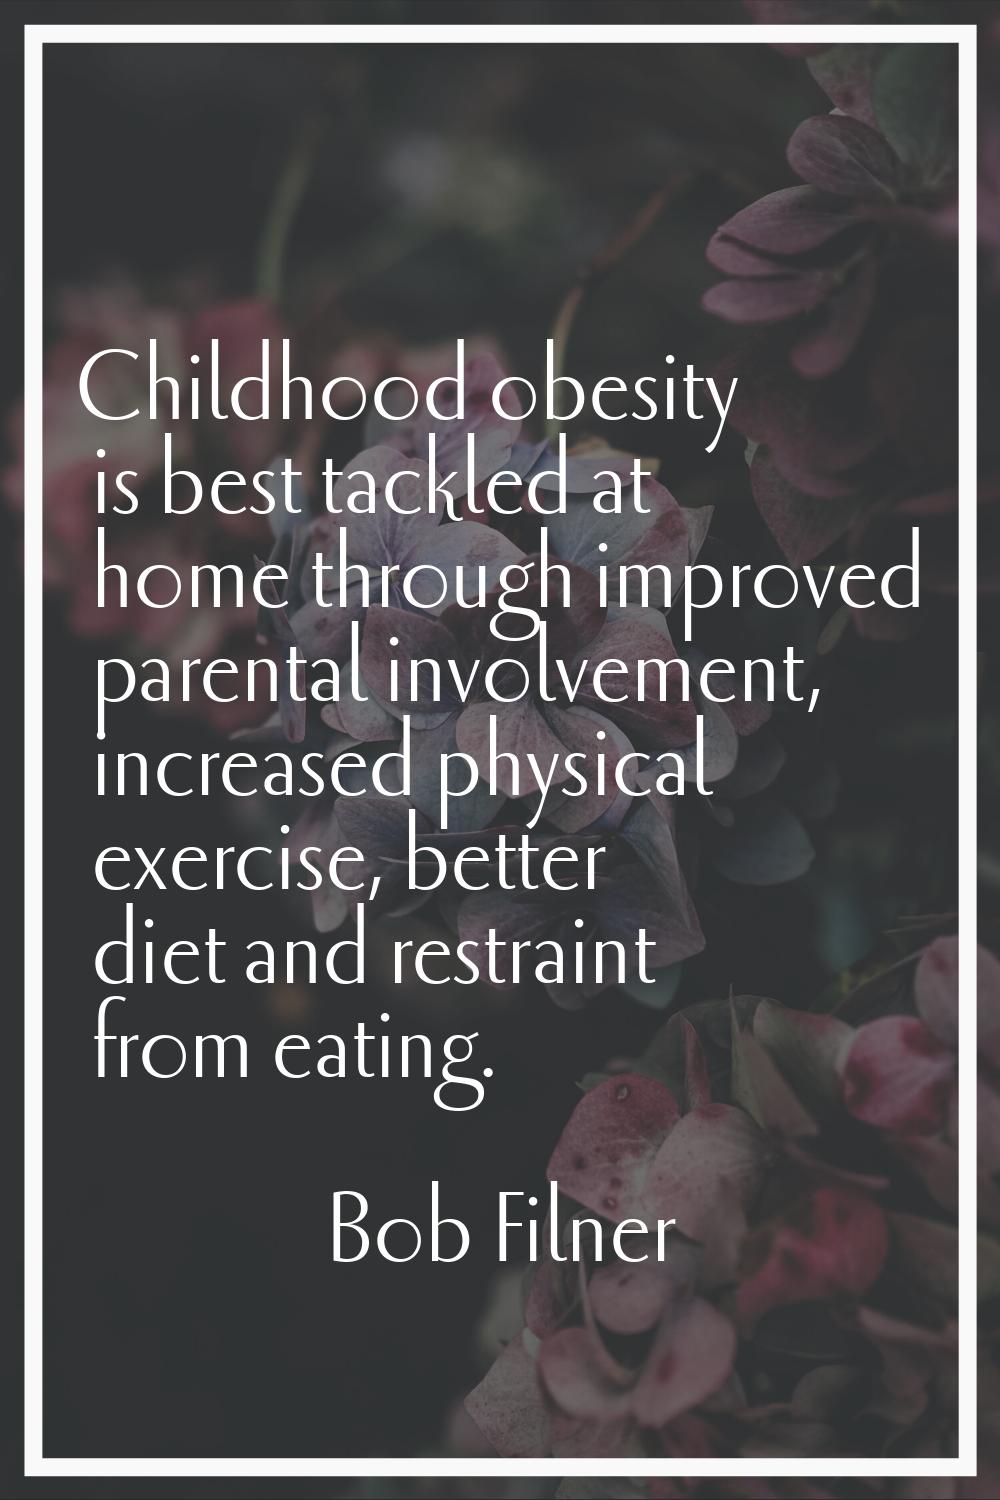 Childhood obesity is best tackled at home through improved parental involvement, increased physical